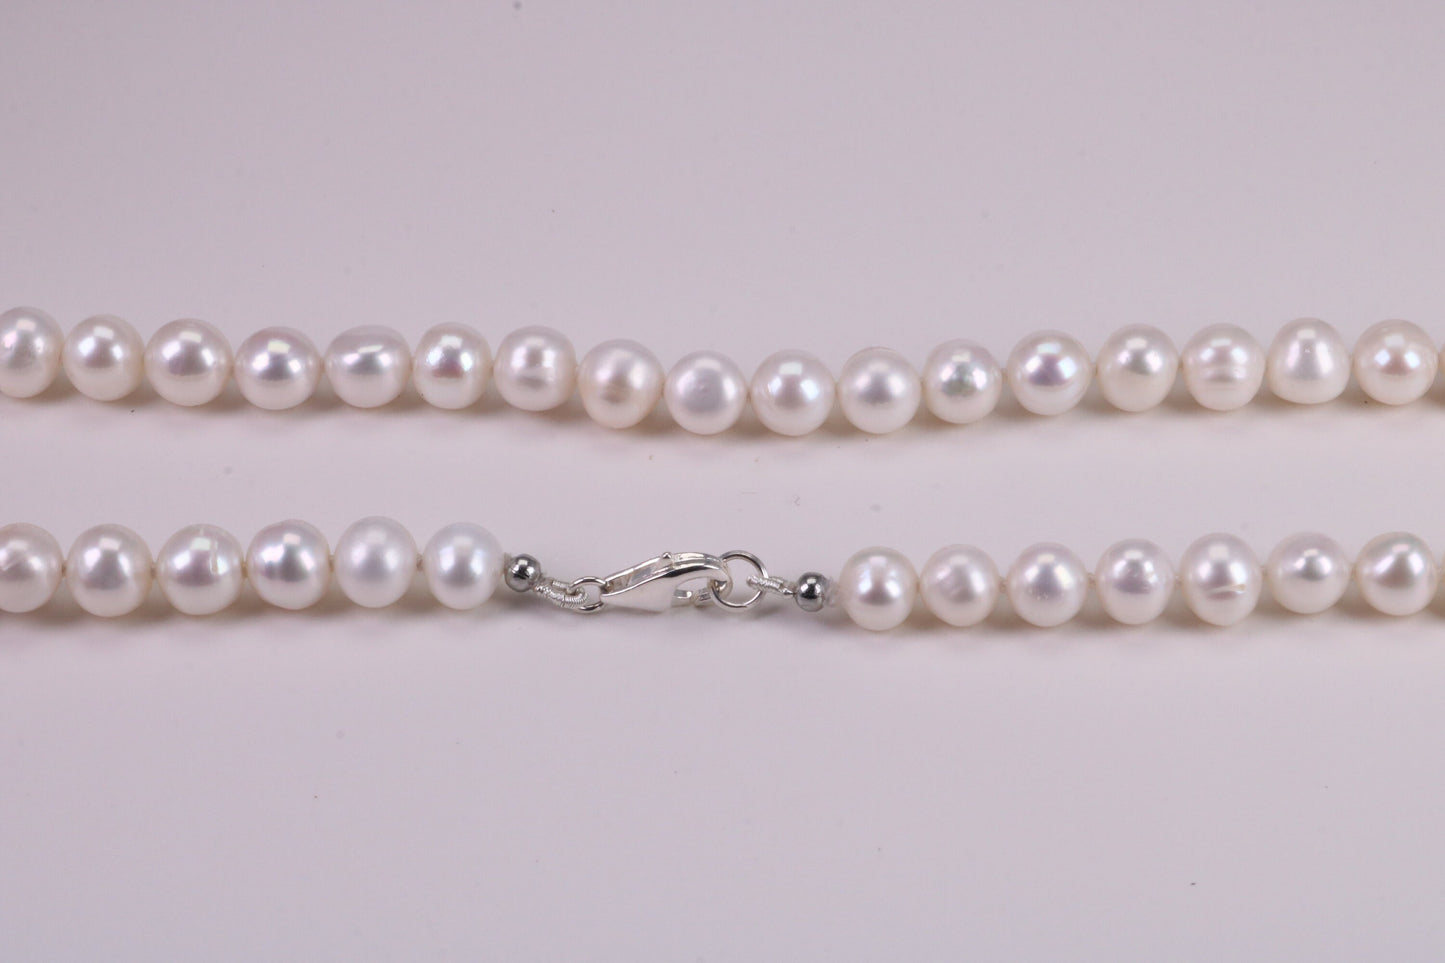 20 Inches Long Single Strand Natural 8 mm Round Pearl Necklace set in Silver